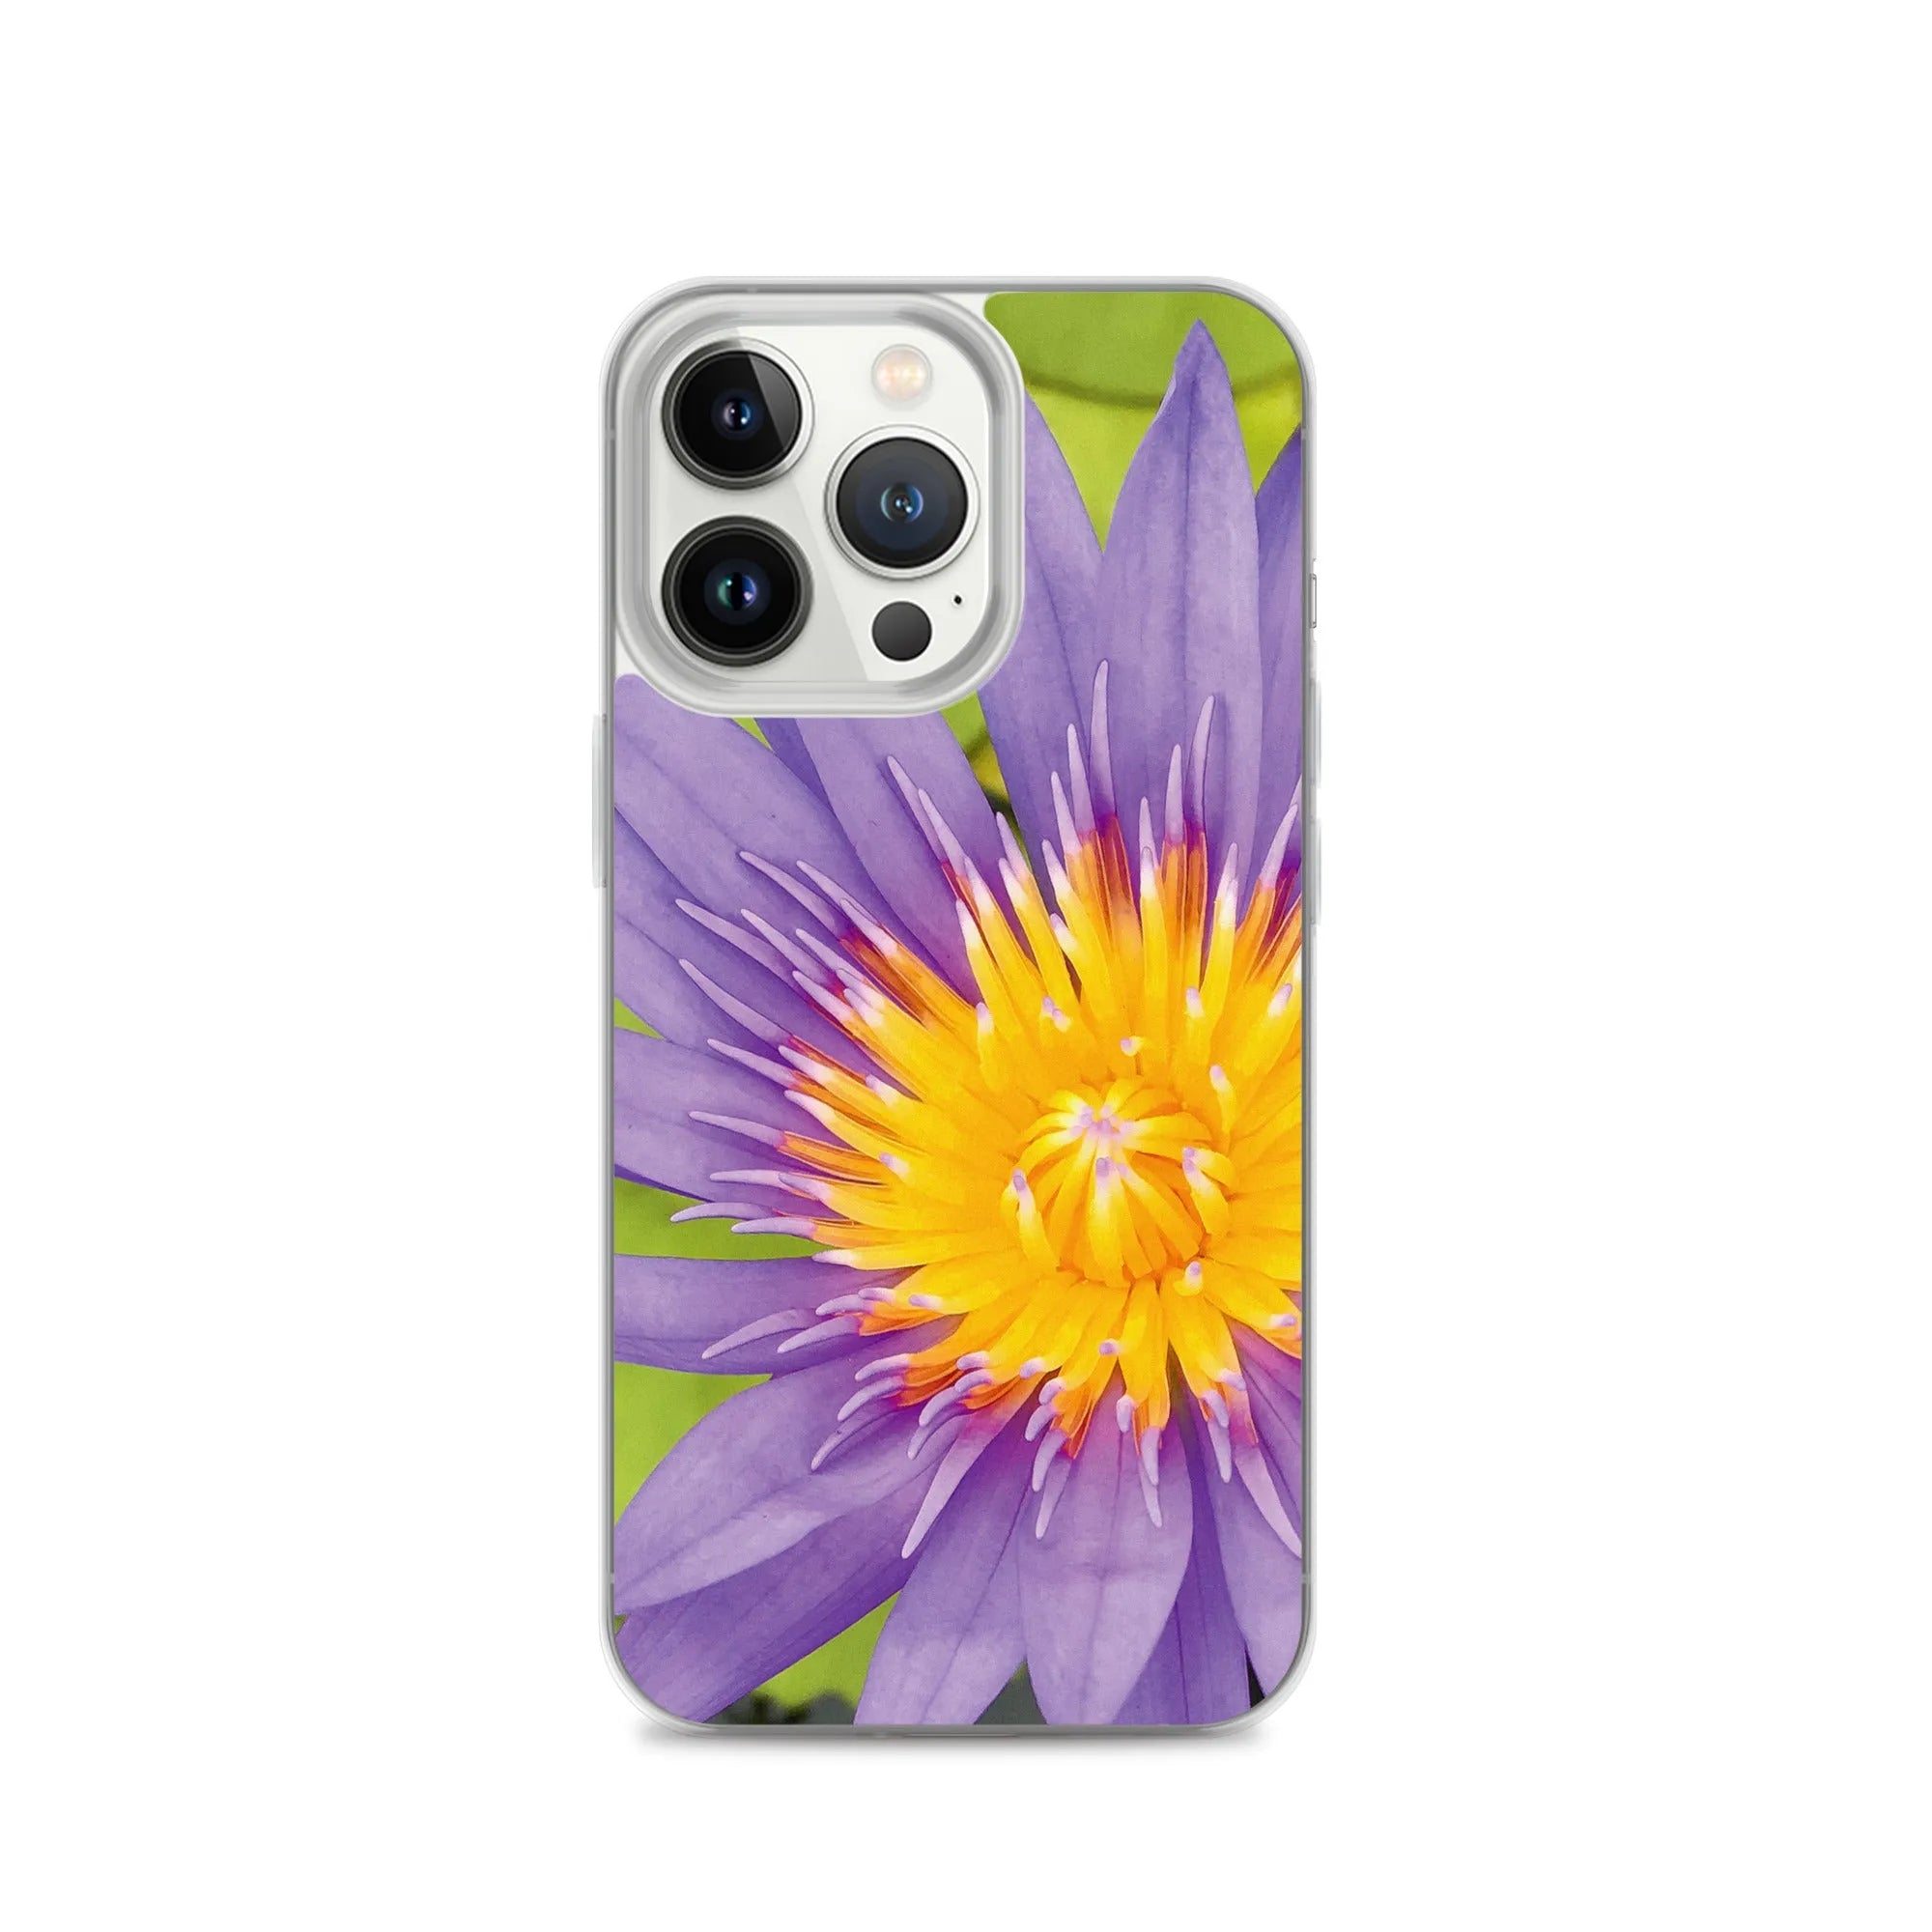 Lilliput Floral Iphone Case - Iphone 13 Pro - Mobile Phone Cases - Aesthetic Art